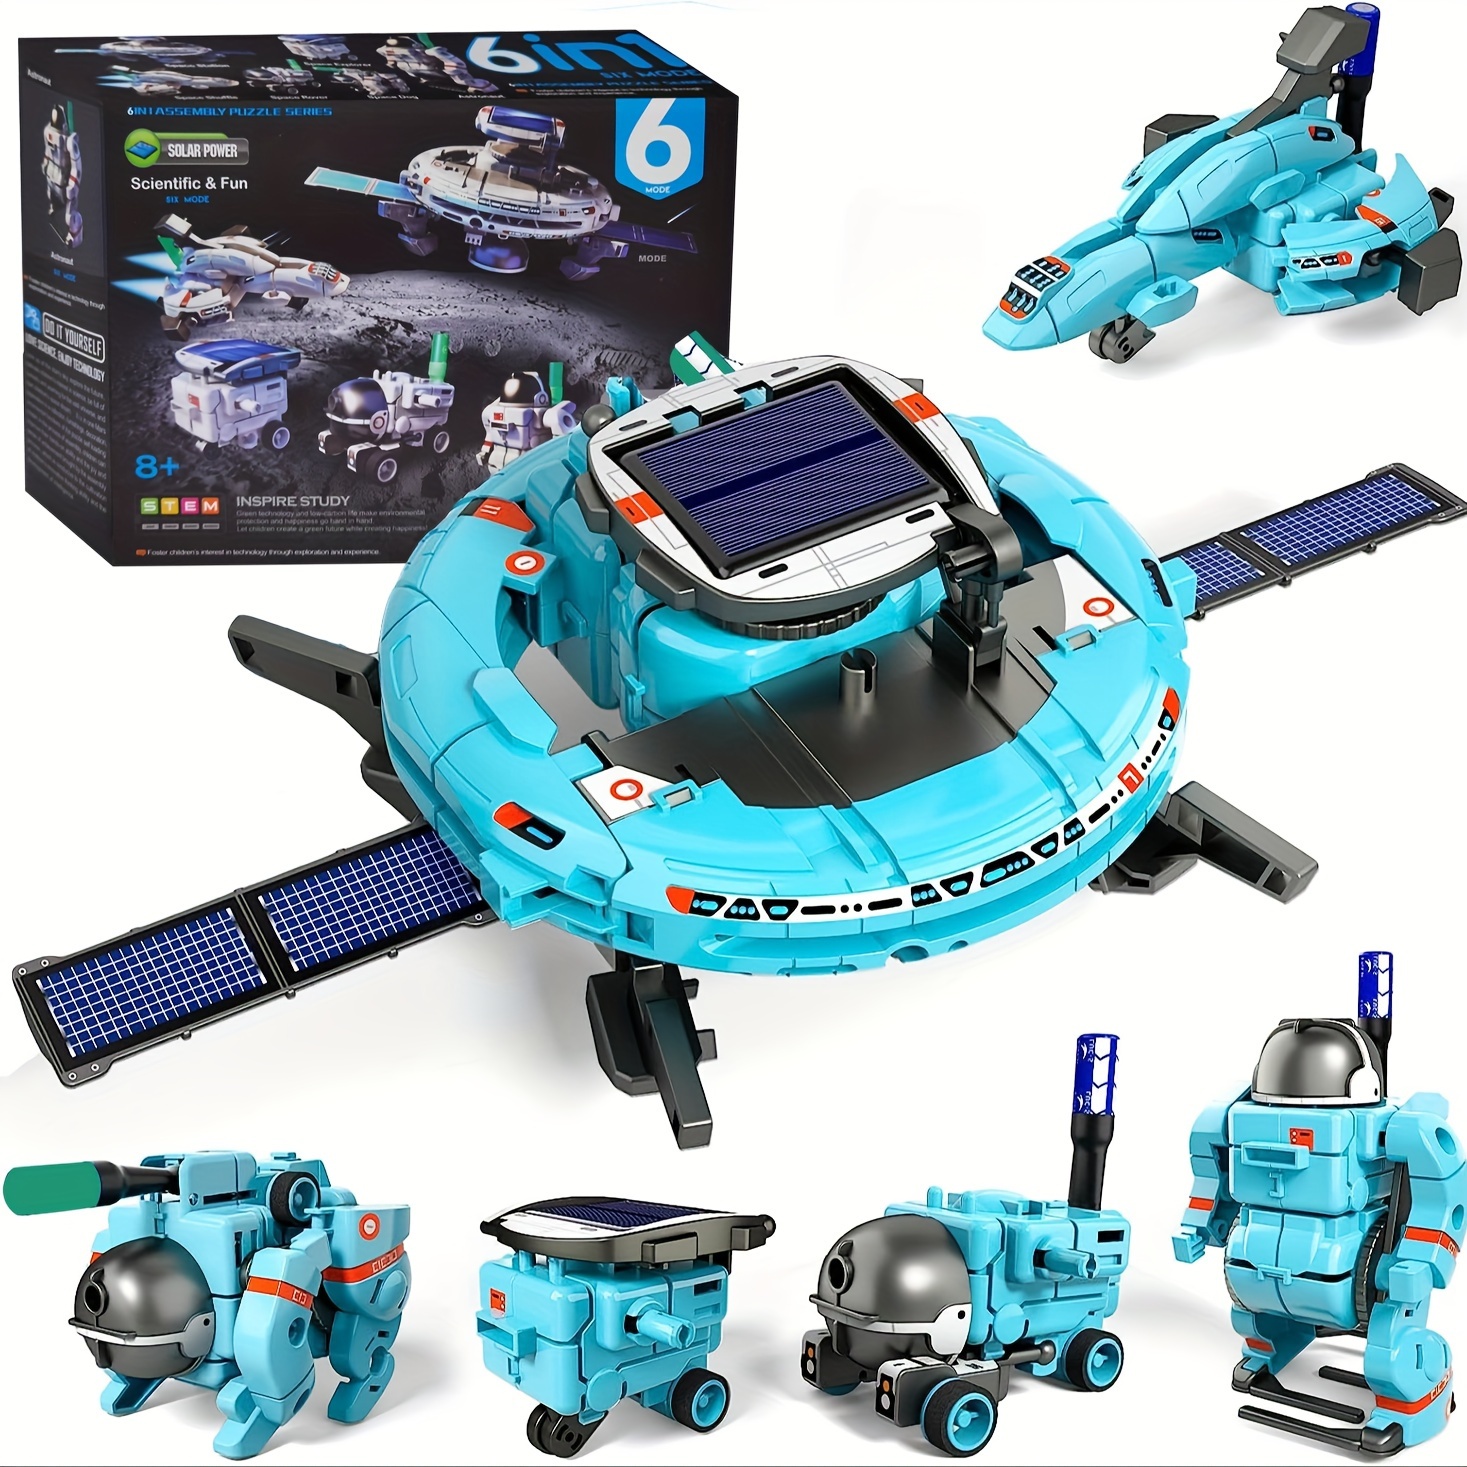 Solar Robot Kit for Kids Age 8-12, Stem Building Toys,12-in-1 Build Your Own Robot with Solar Panel & Battery Power, Science Engineering Christmas